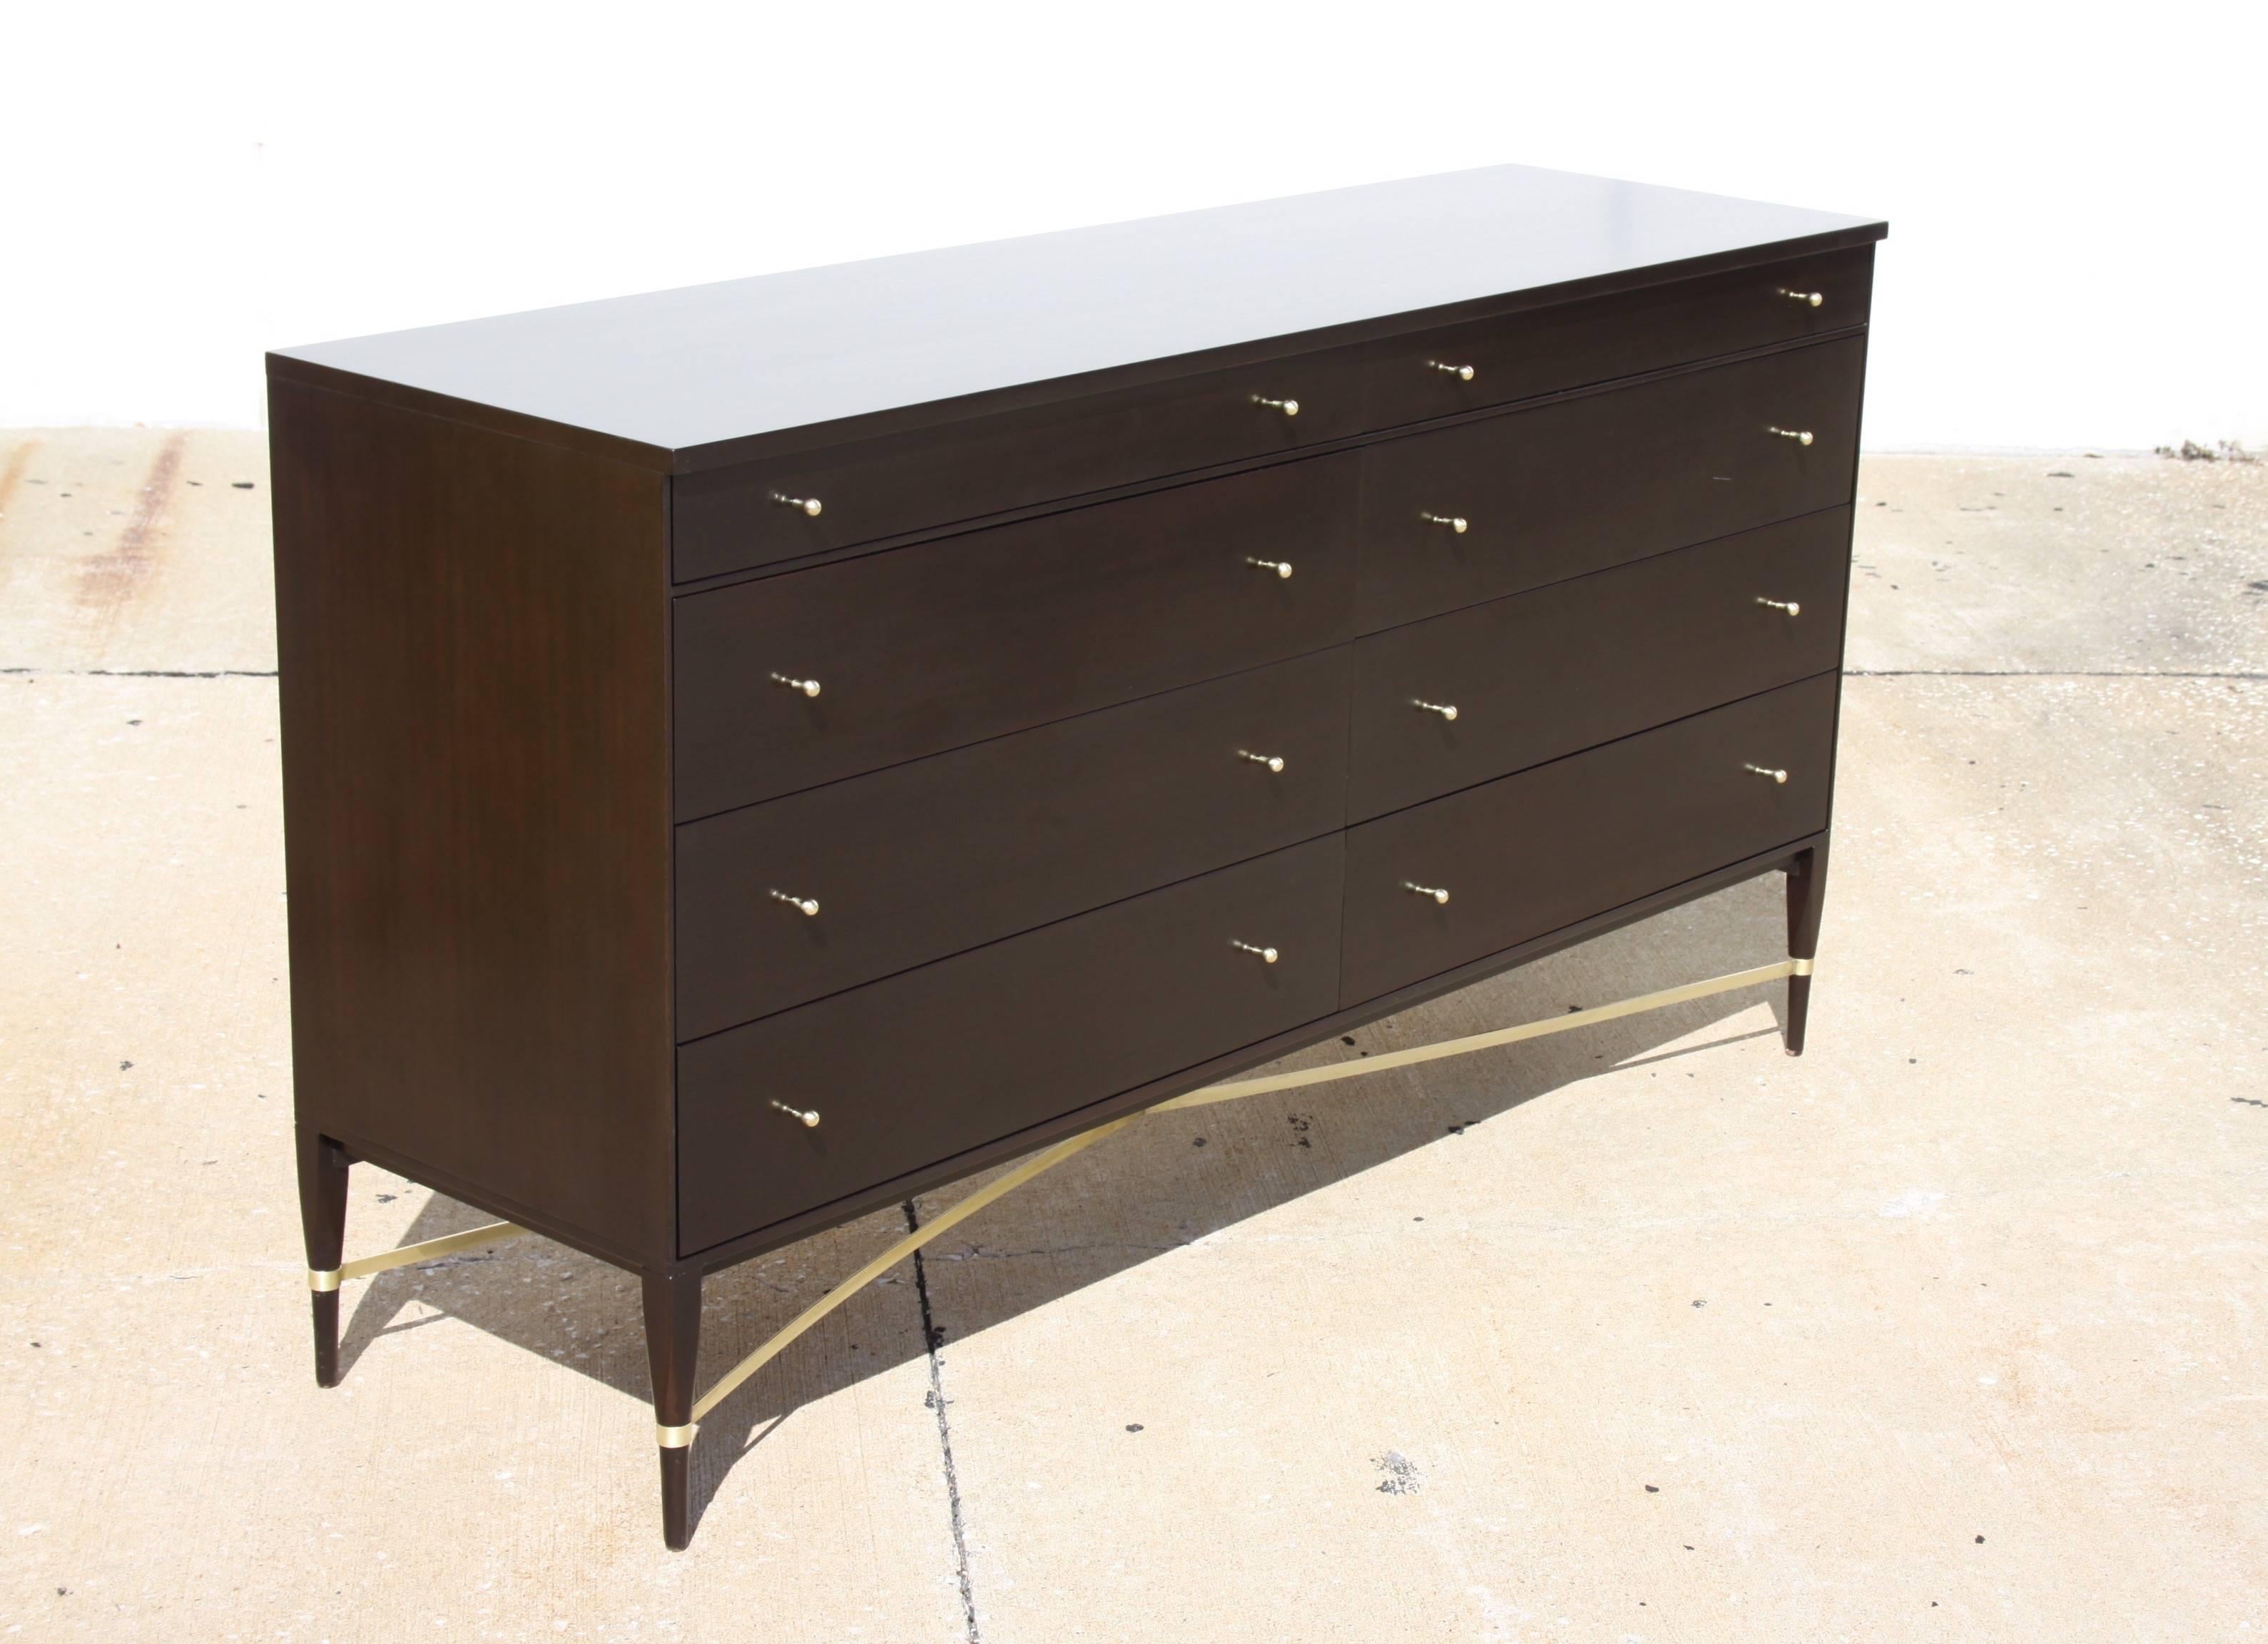 Paul McCobb for Calvin Group fully restored eight-drawer dresser with brass cross stretcher. Mahogany refinished in espresso, original knobs butler brass plated and brass X-base polished. This version is rarely seen, can also be used as a sideboard.